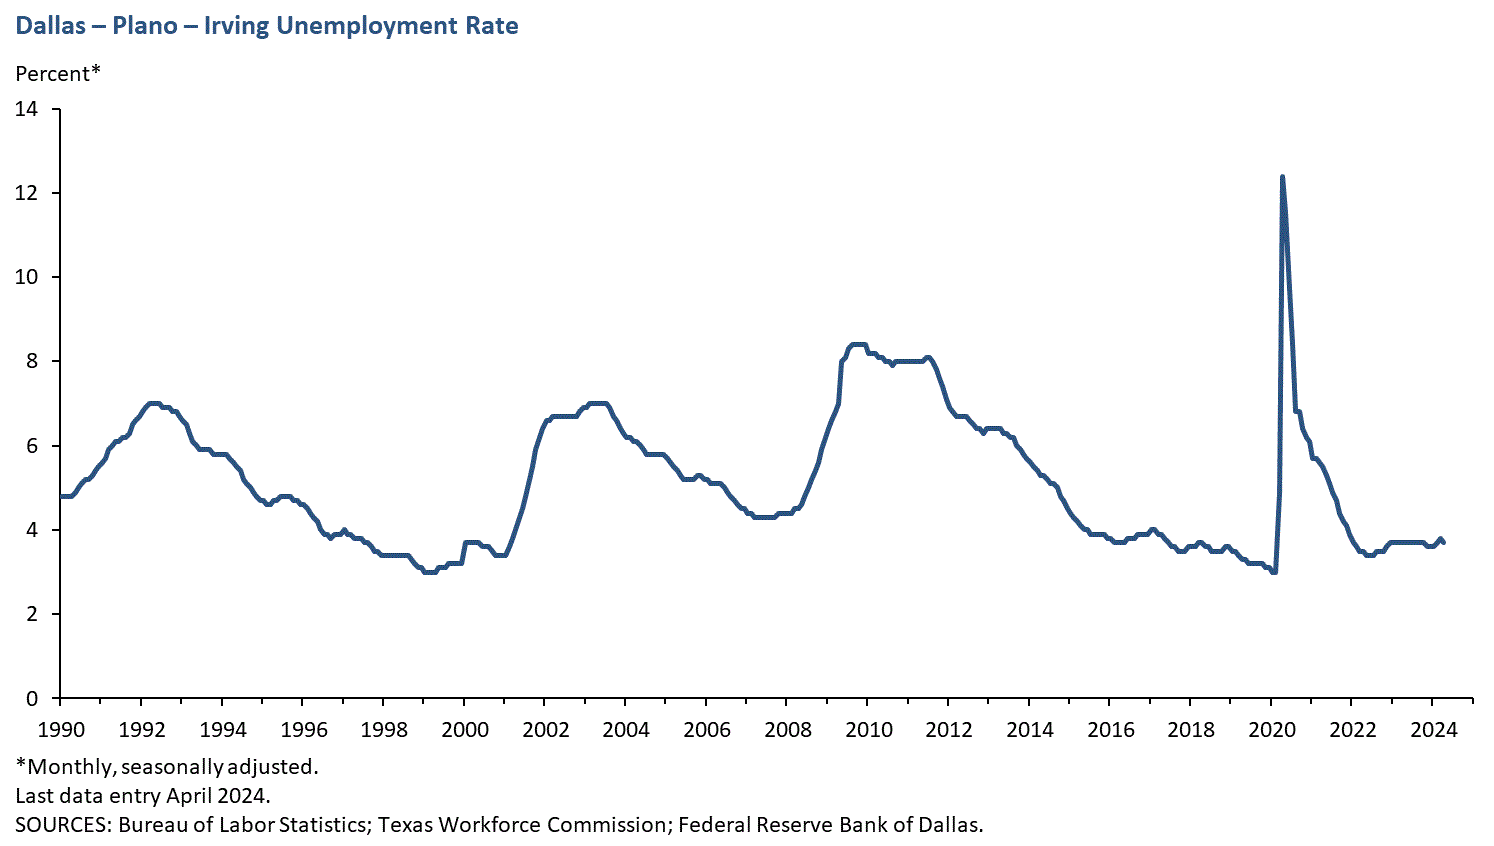 Dallas - Plano - Irving Unemployment Rate